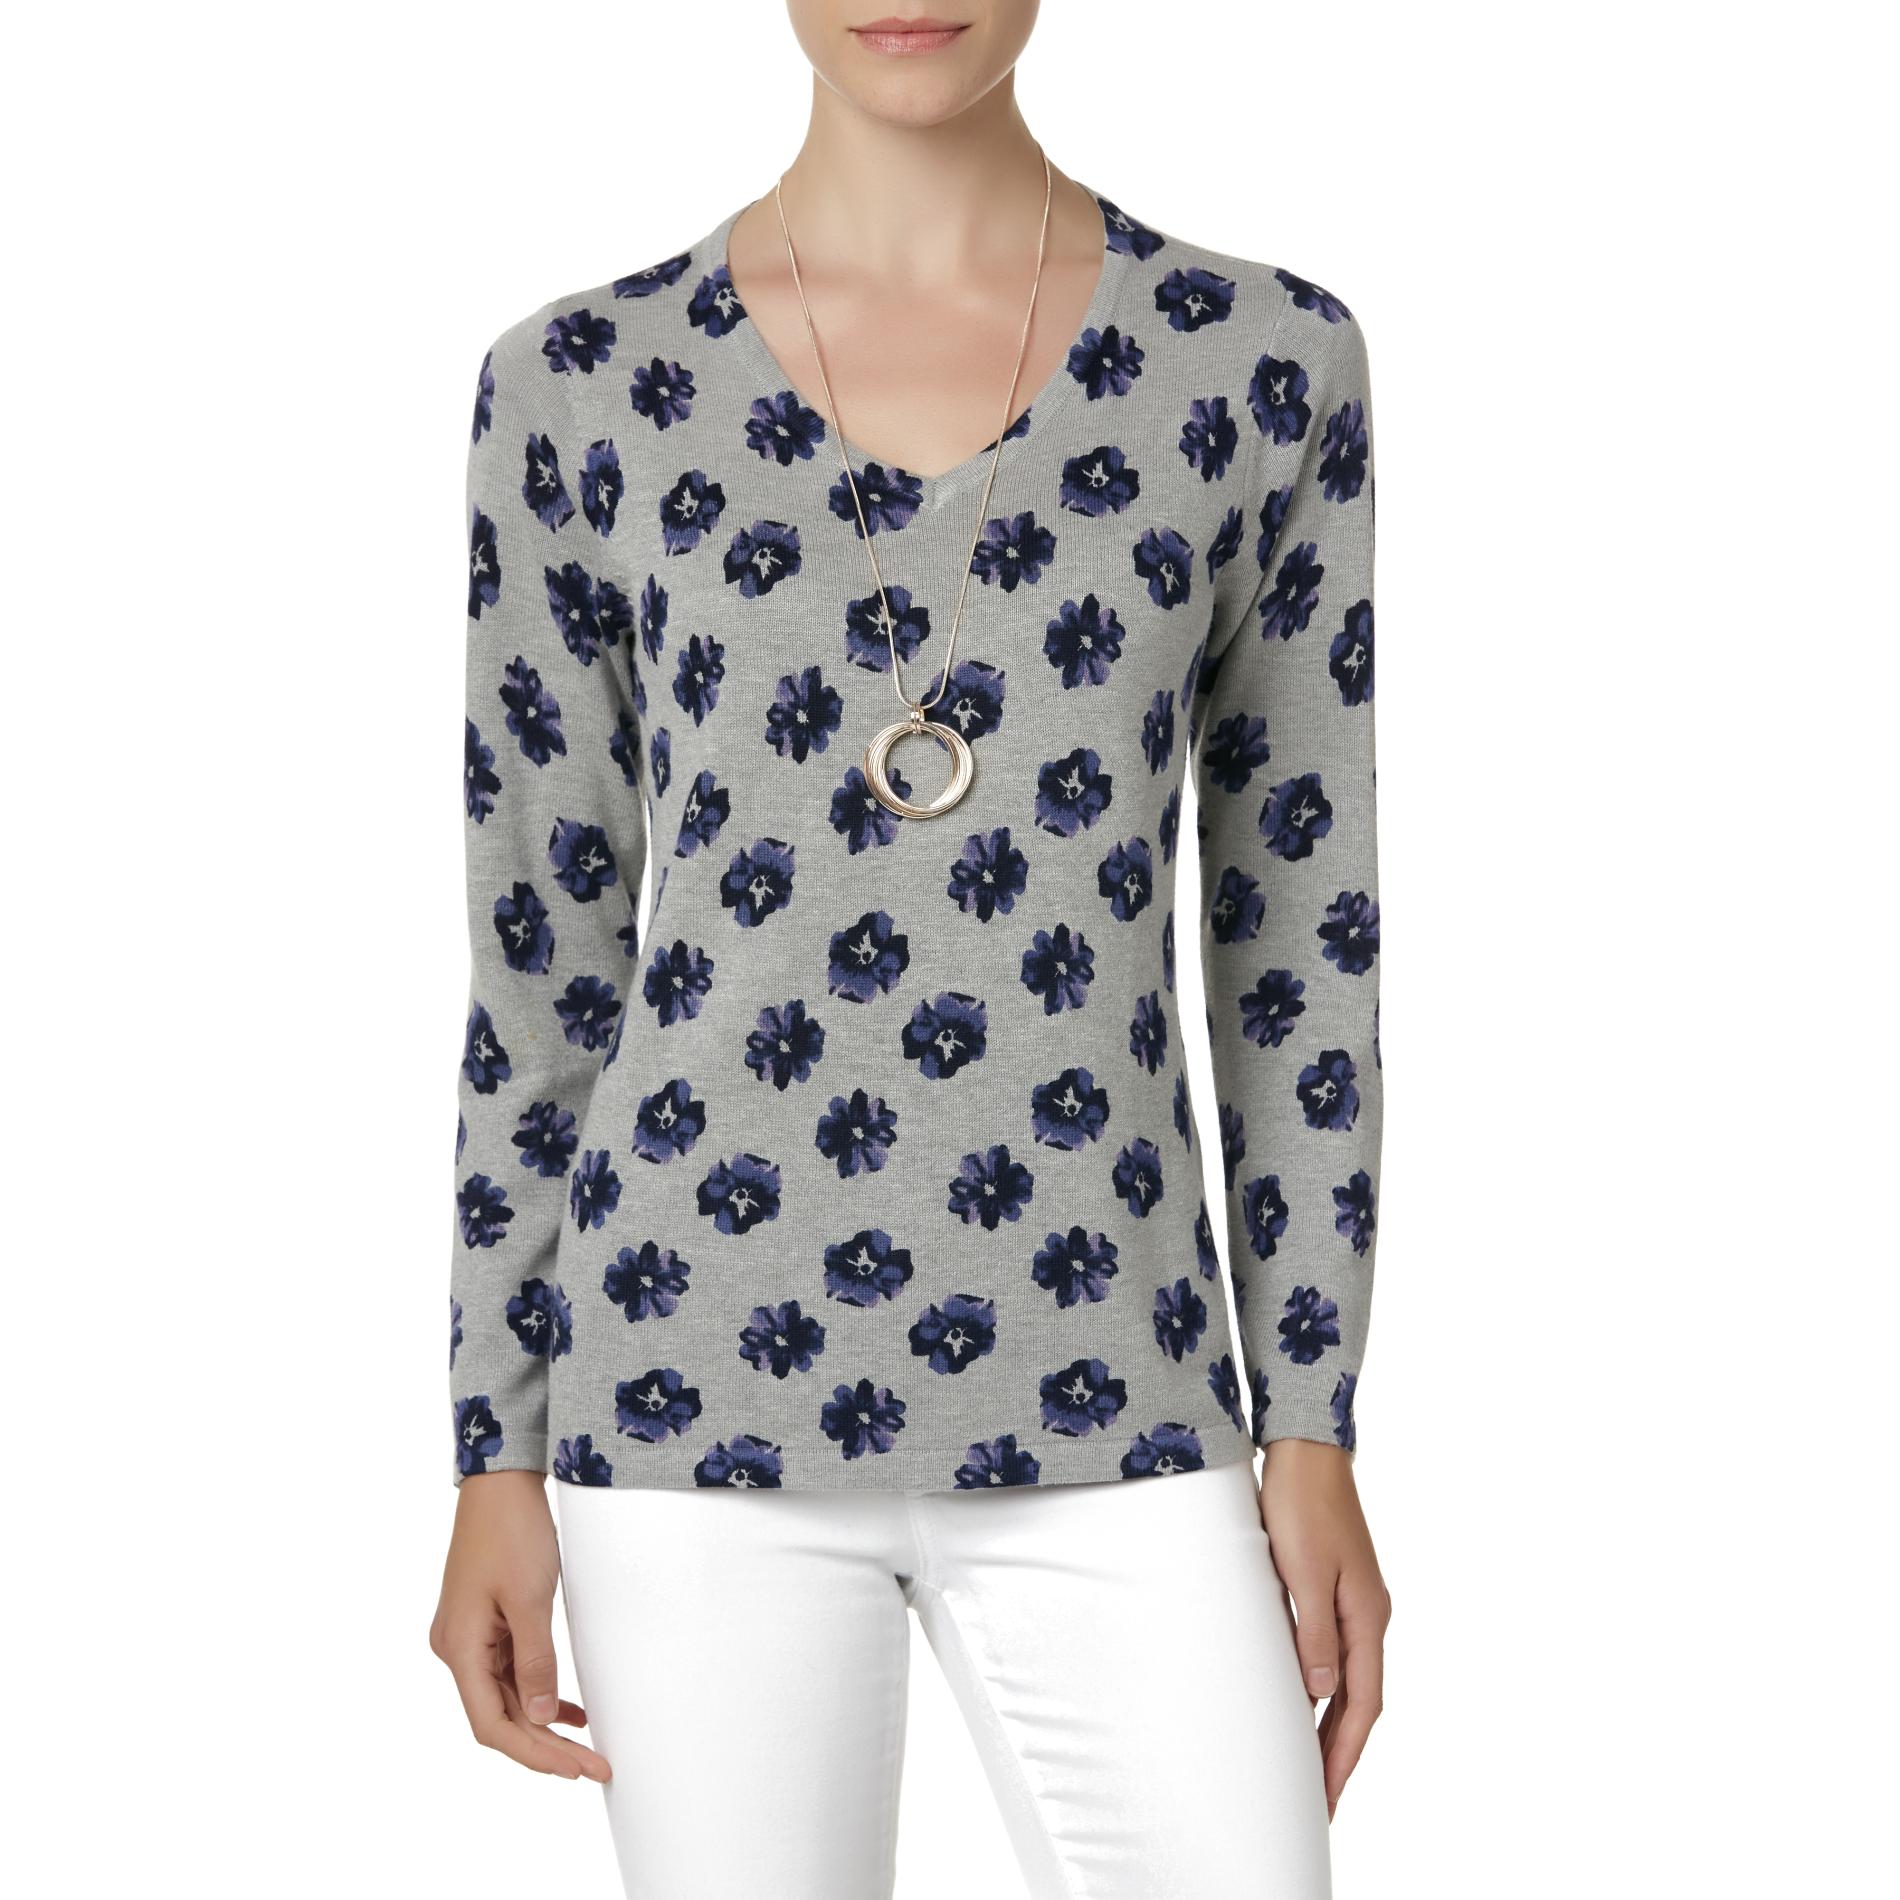 Basic Editions Women's V-Neck Sweater - Floral